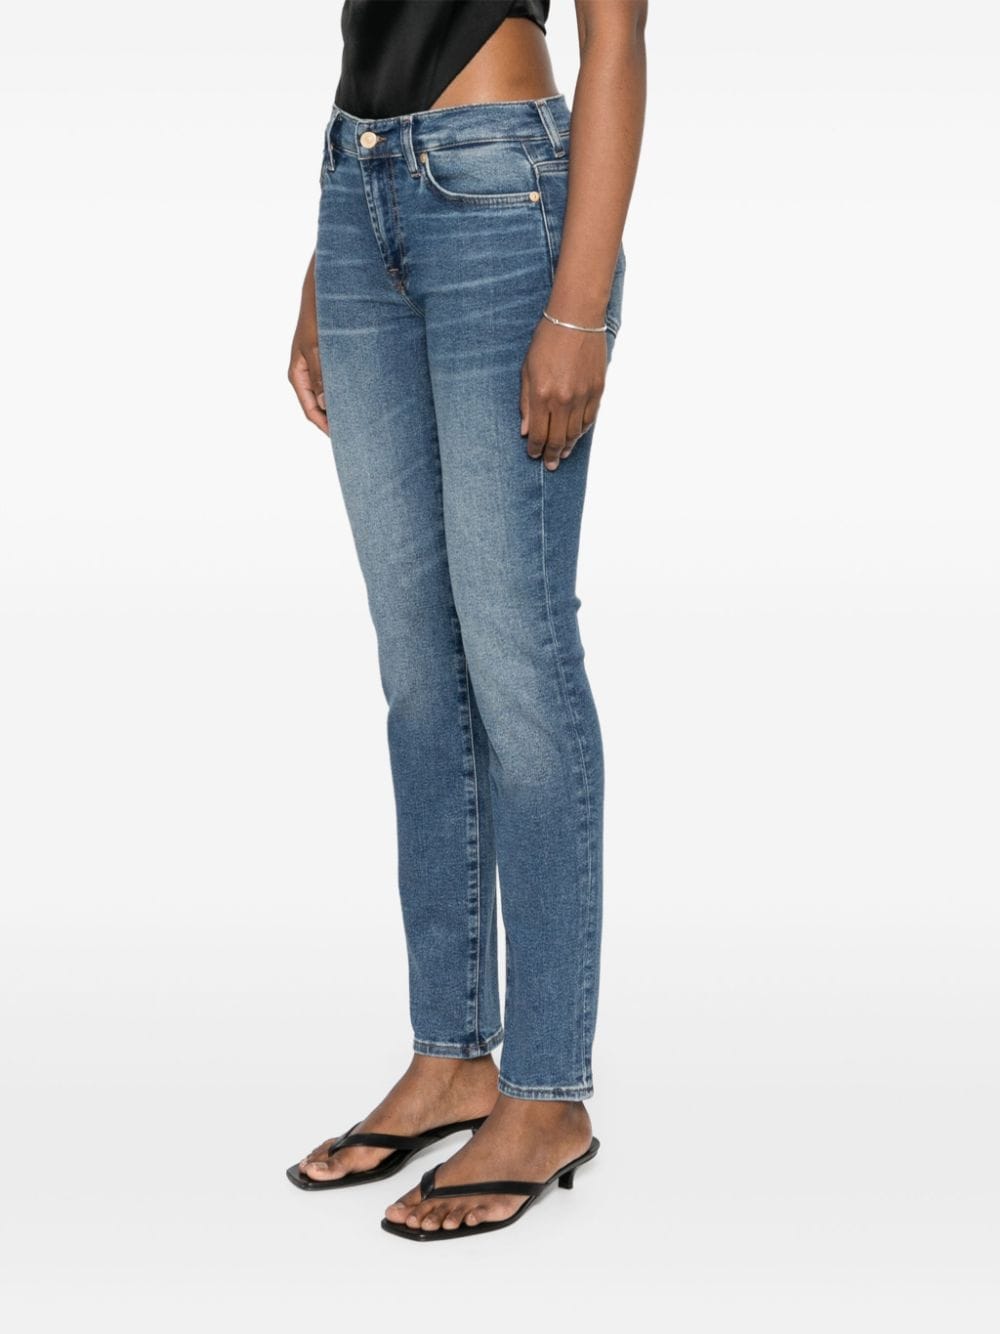 7 For All Mankind 7 FOR ALL MANKIND- Roxanne Skinny Jeans